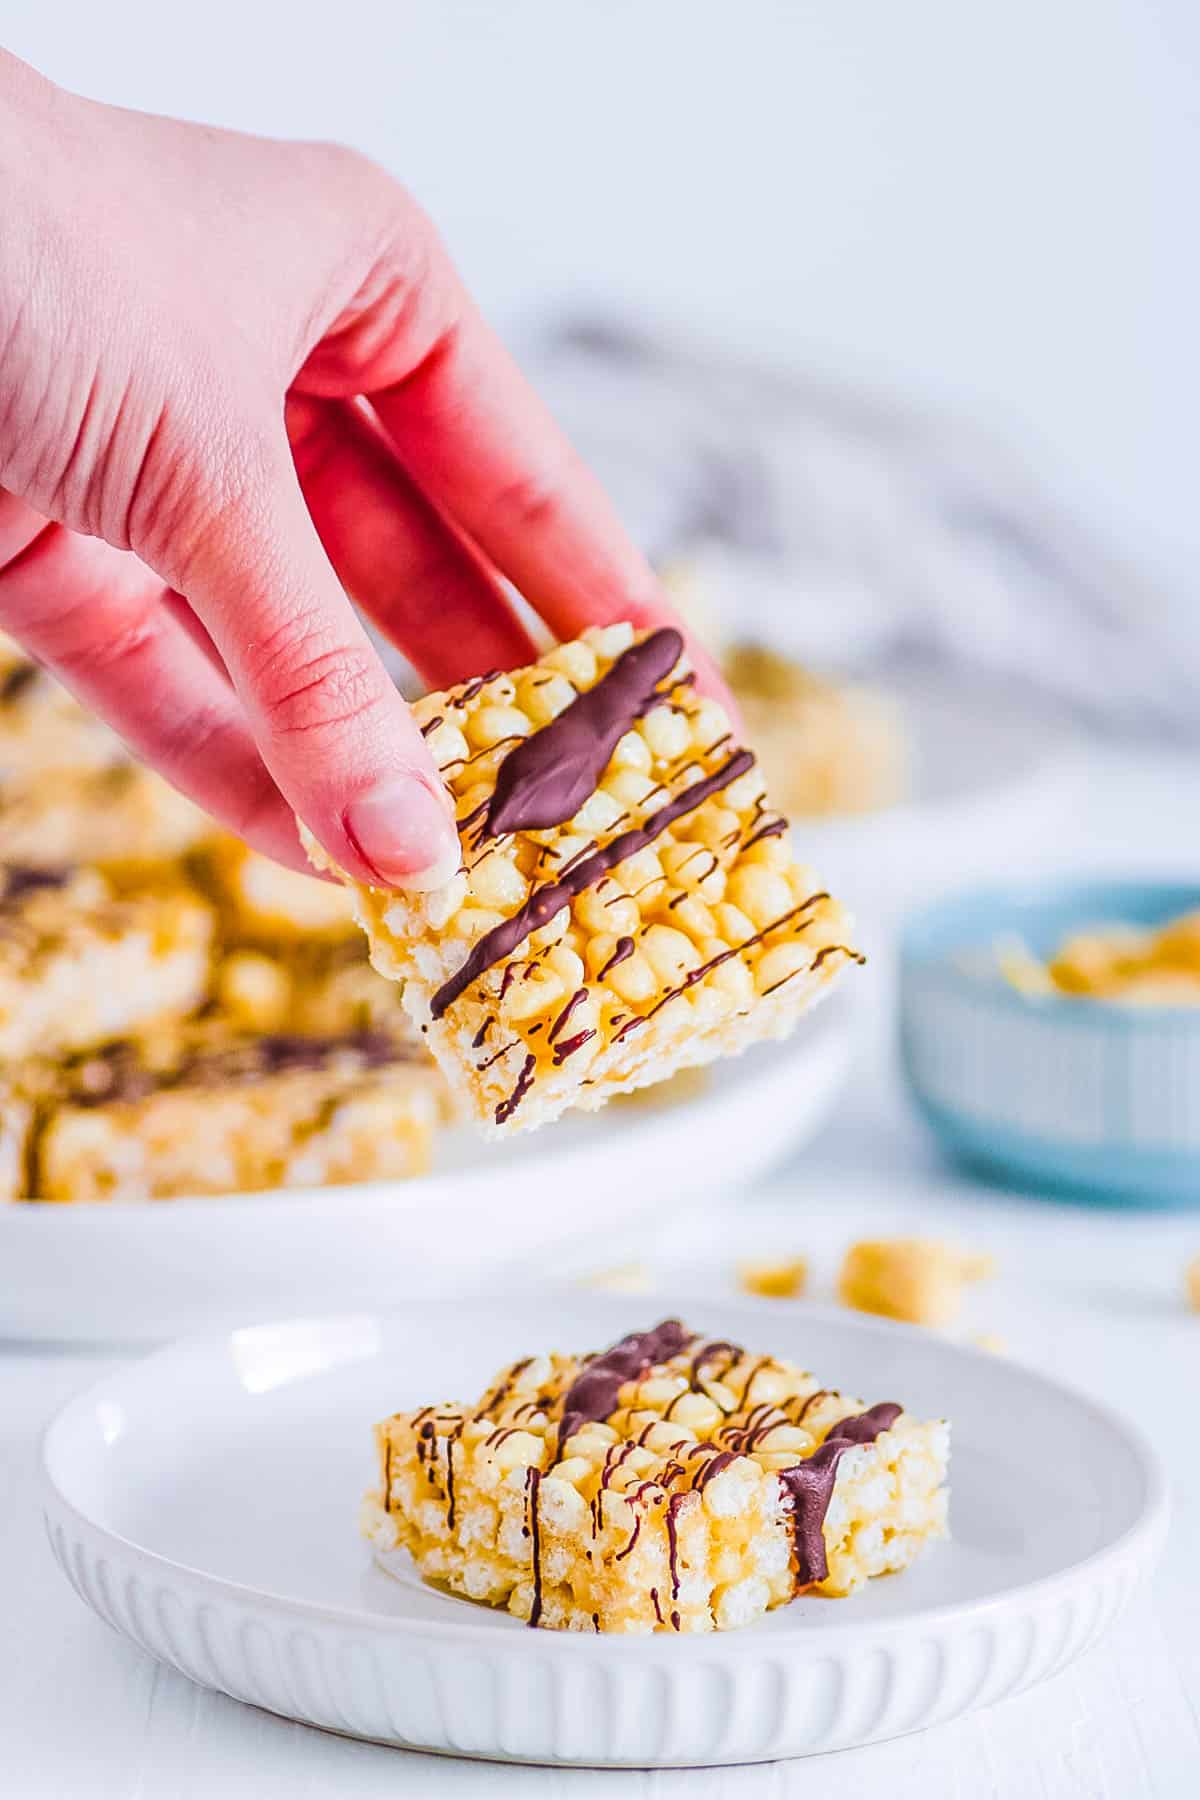 low calorie, healthy rice krispie treats being picked up to eat